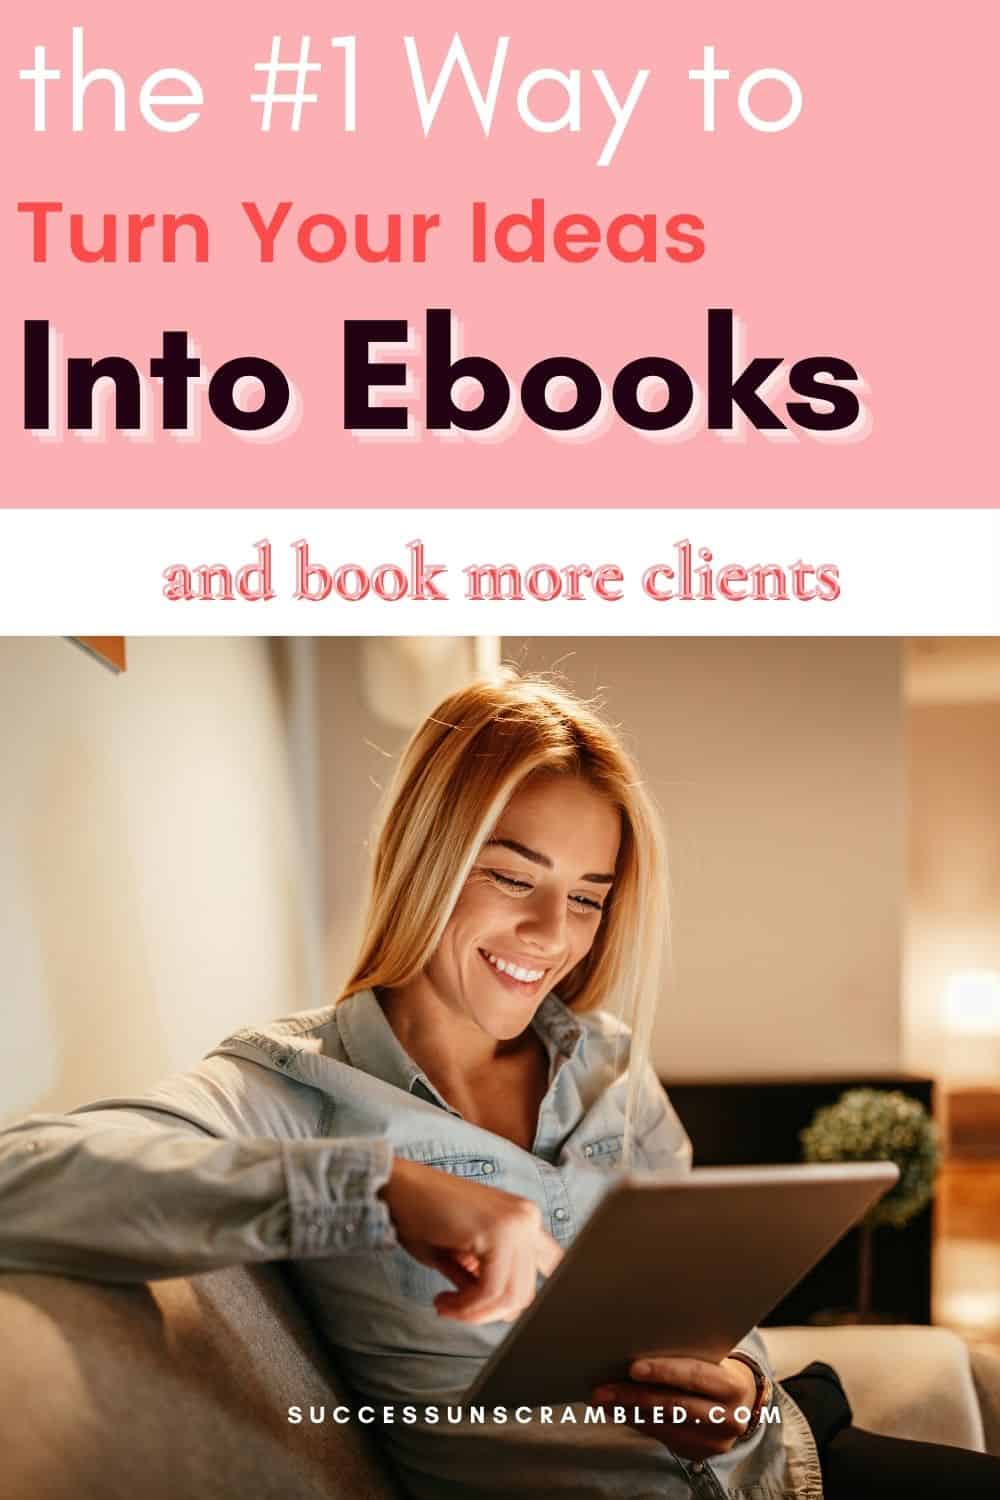 the #1 Way to Turn Your Ideas Into Ebooks and book more clients